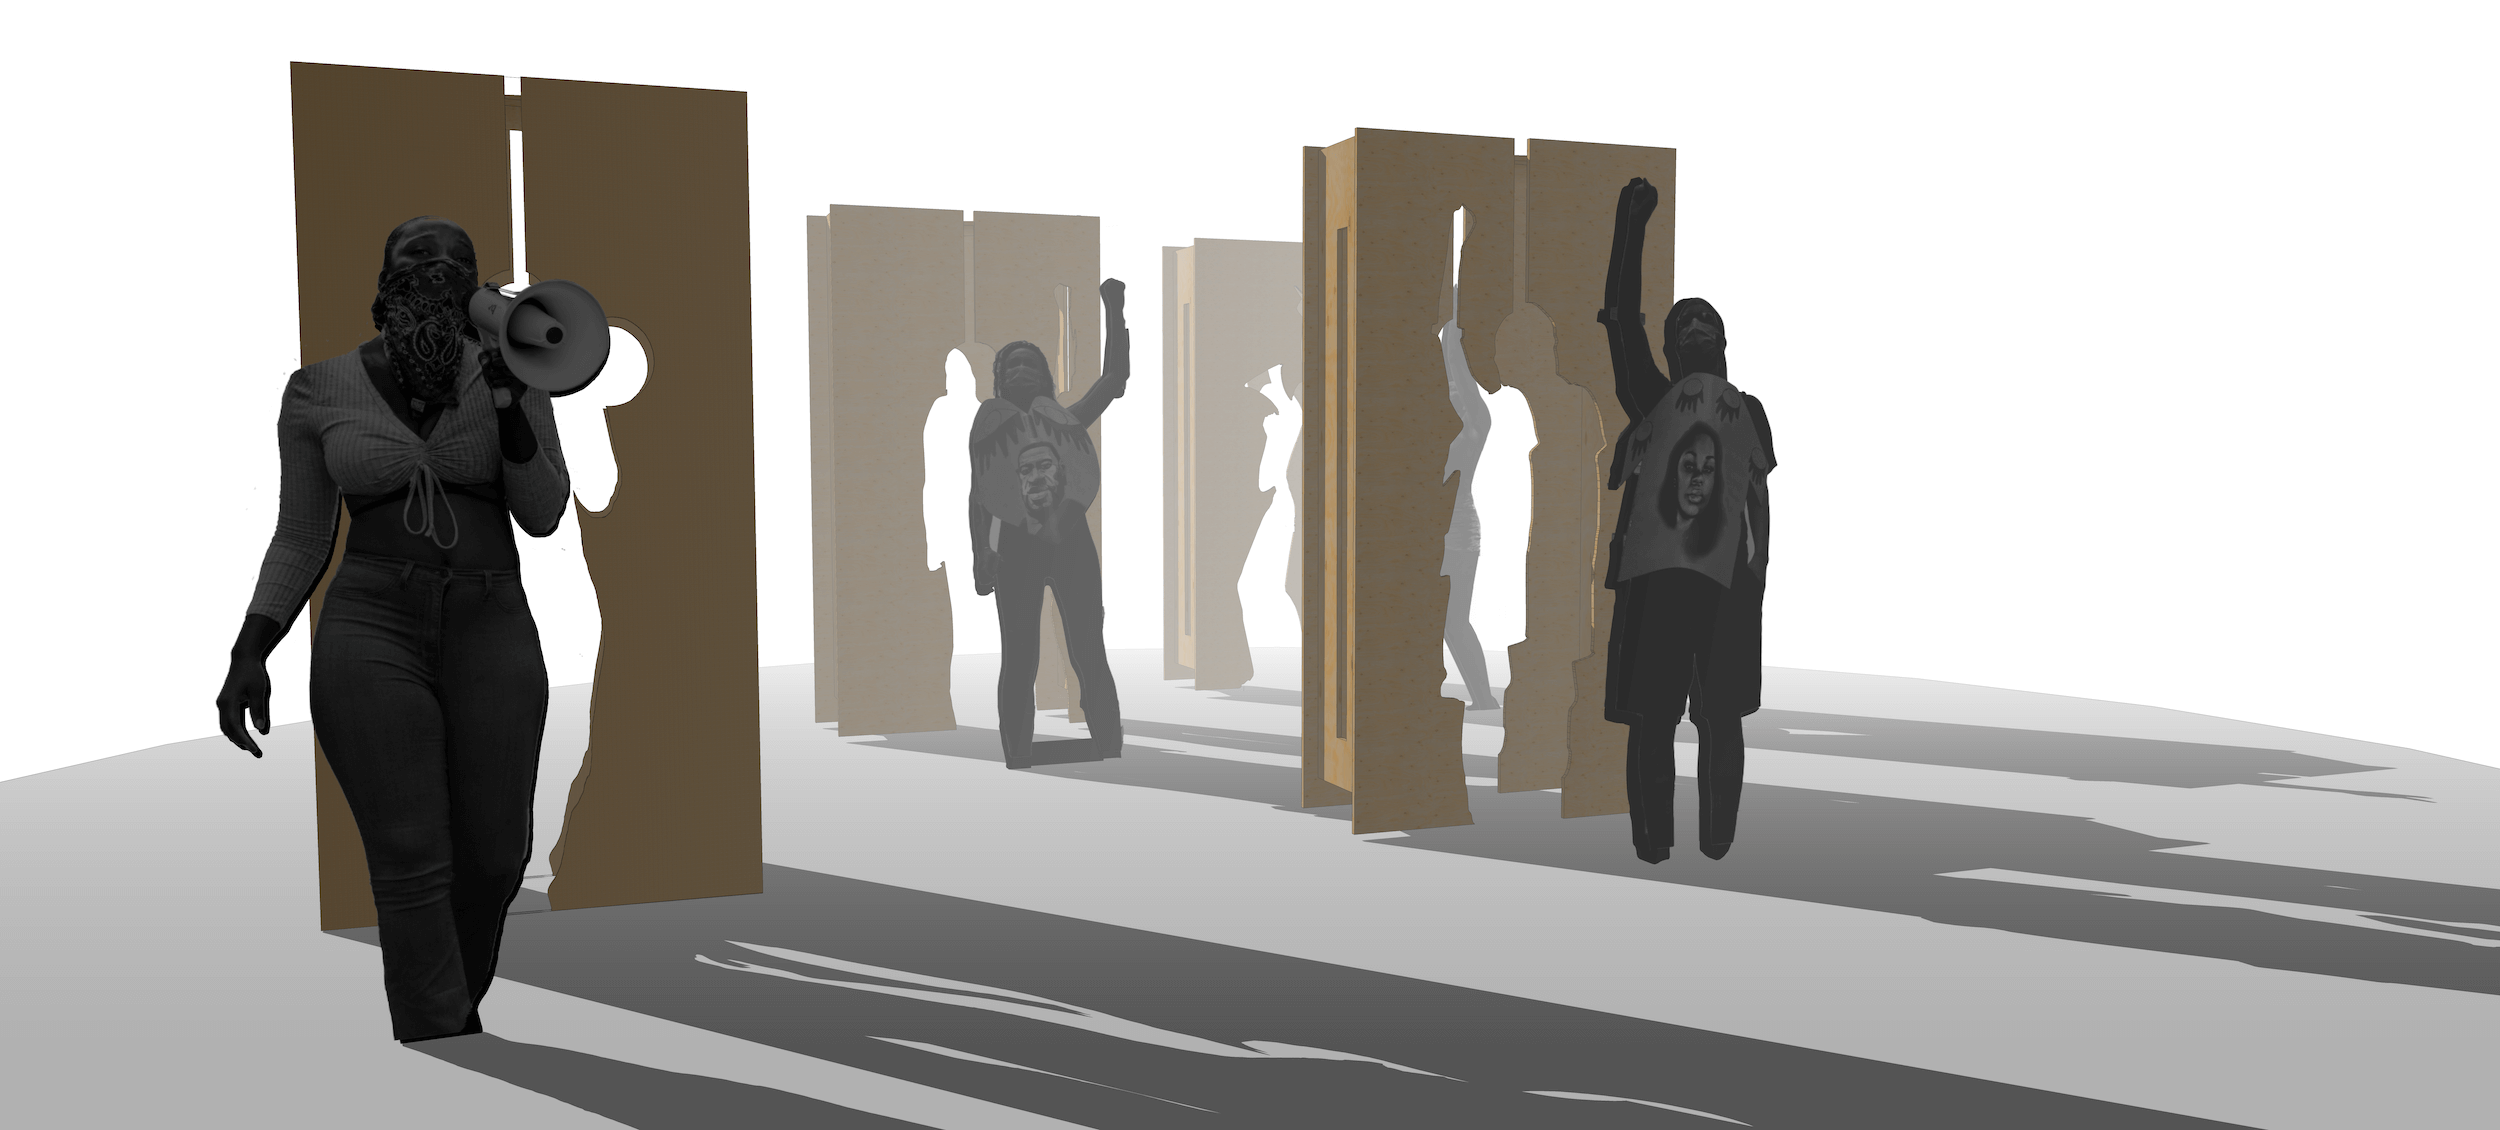 rendering of an art installation incorporating protest plywood, part of the plywood protection project